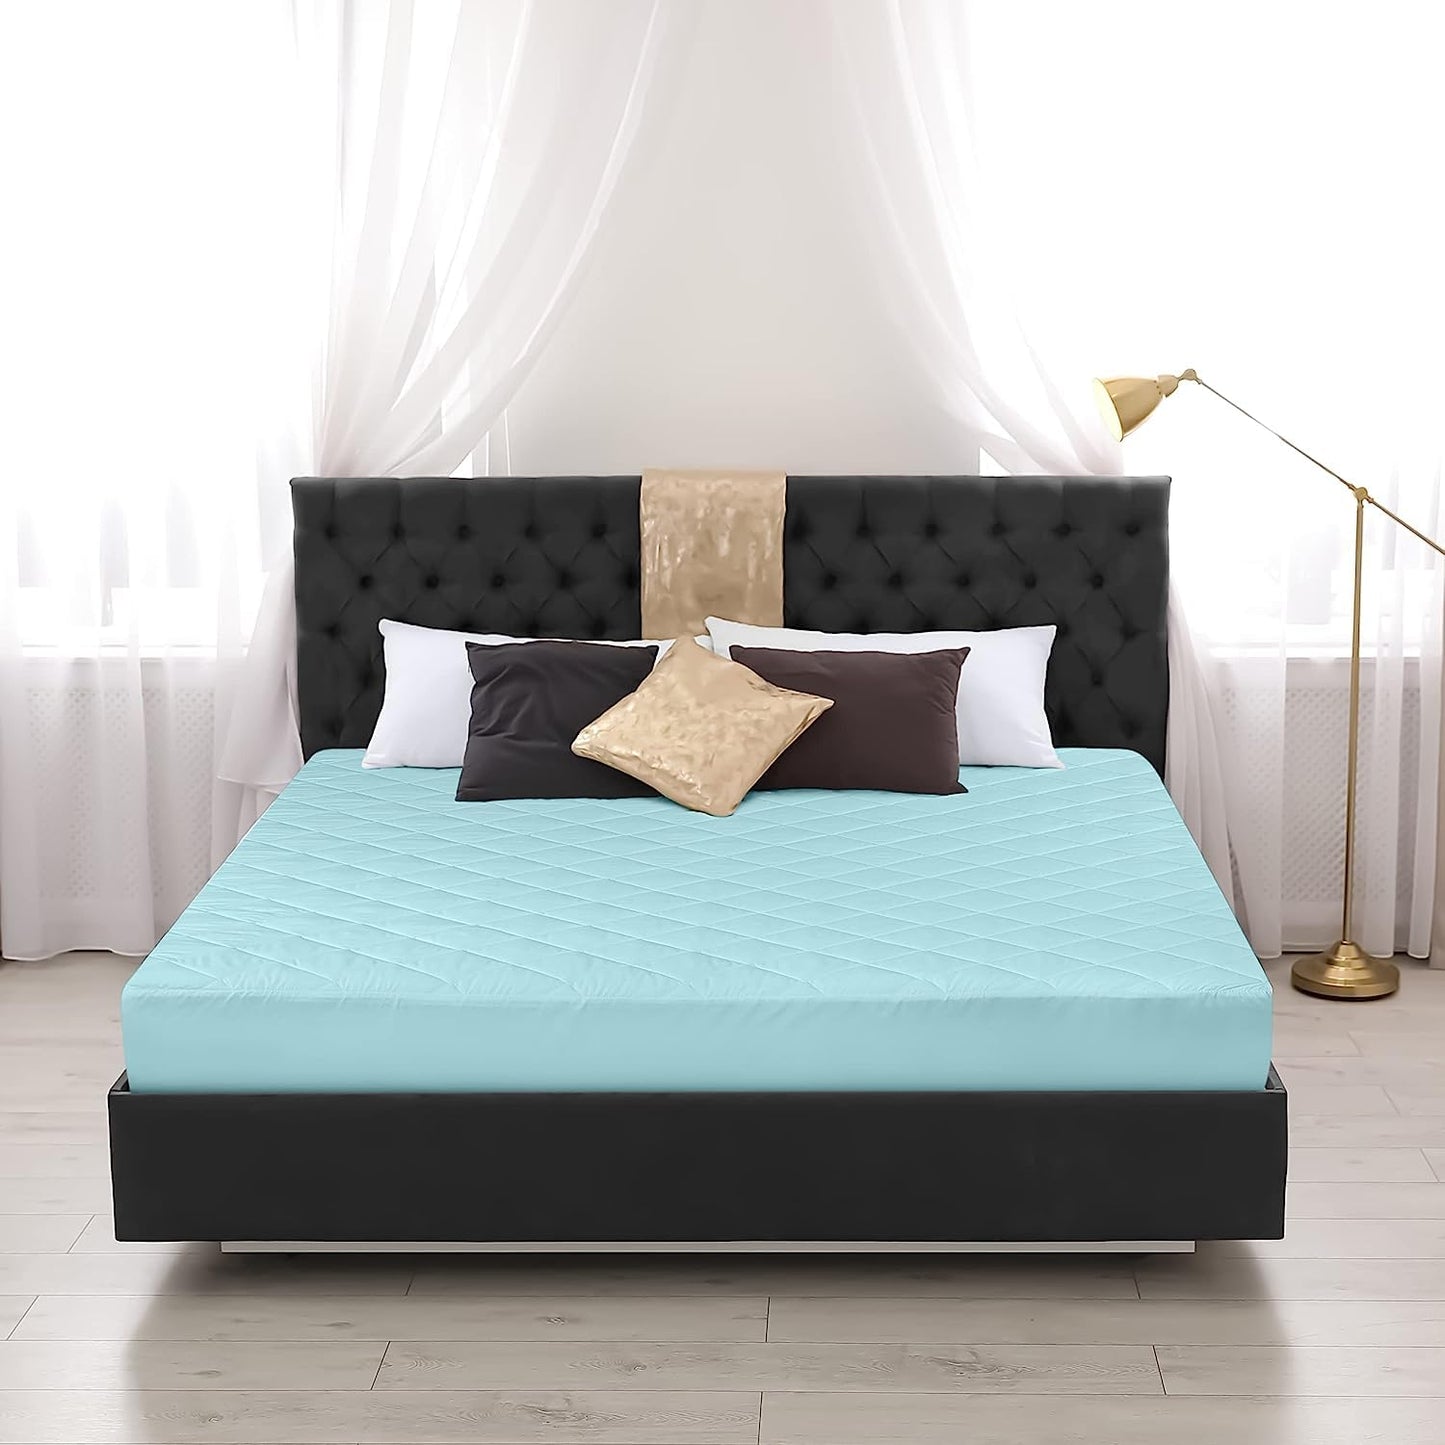 Waterproof Quilted Mattress Protector King Size with Elastic all around (Turquoise Blue)